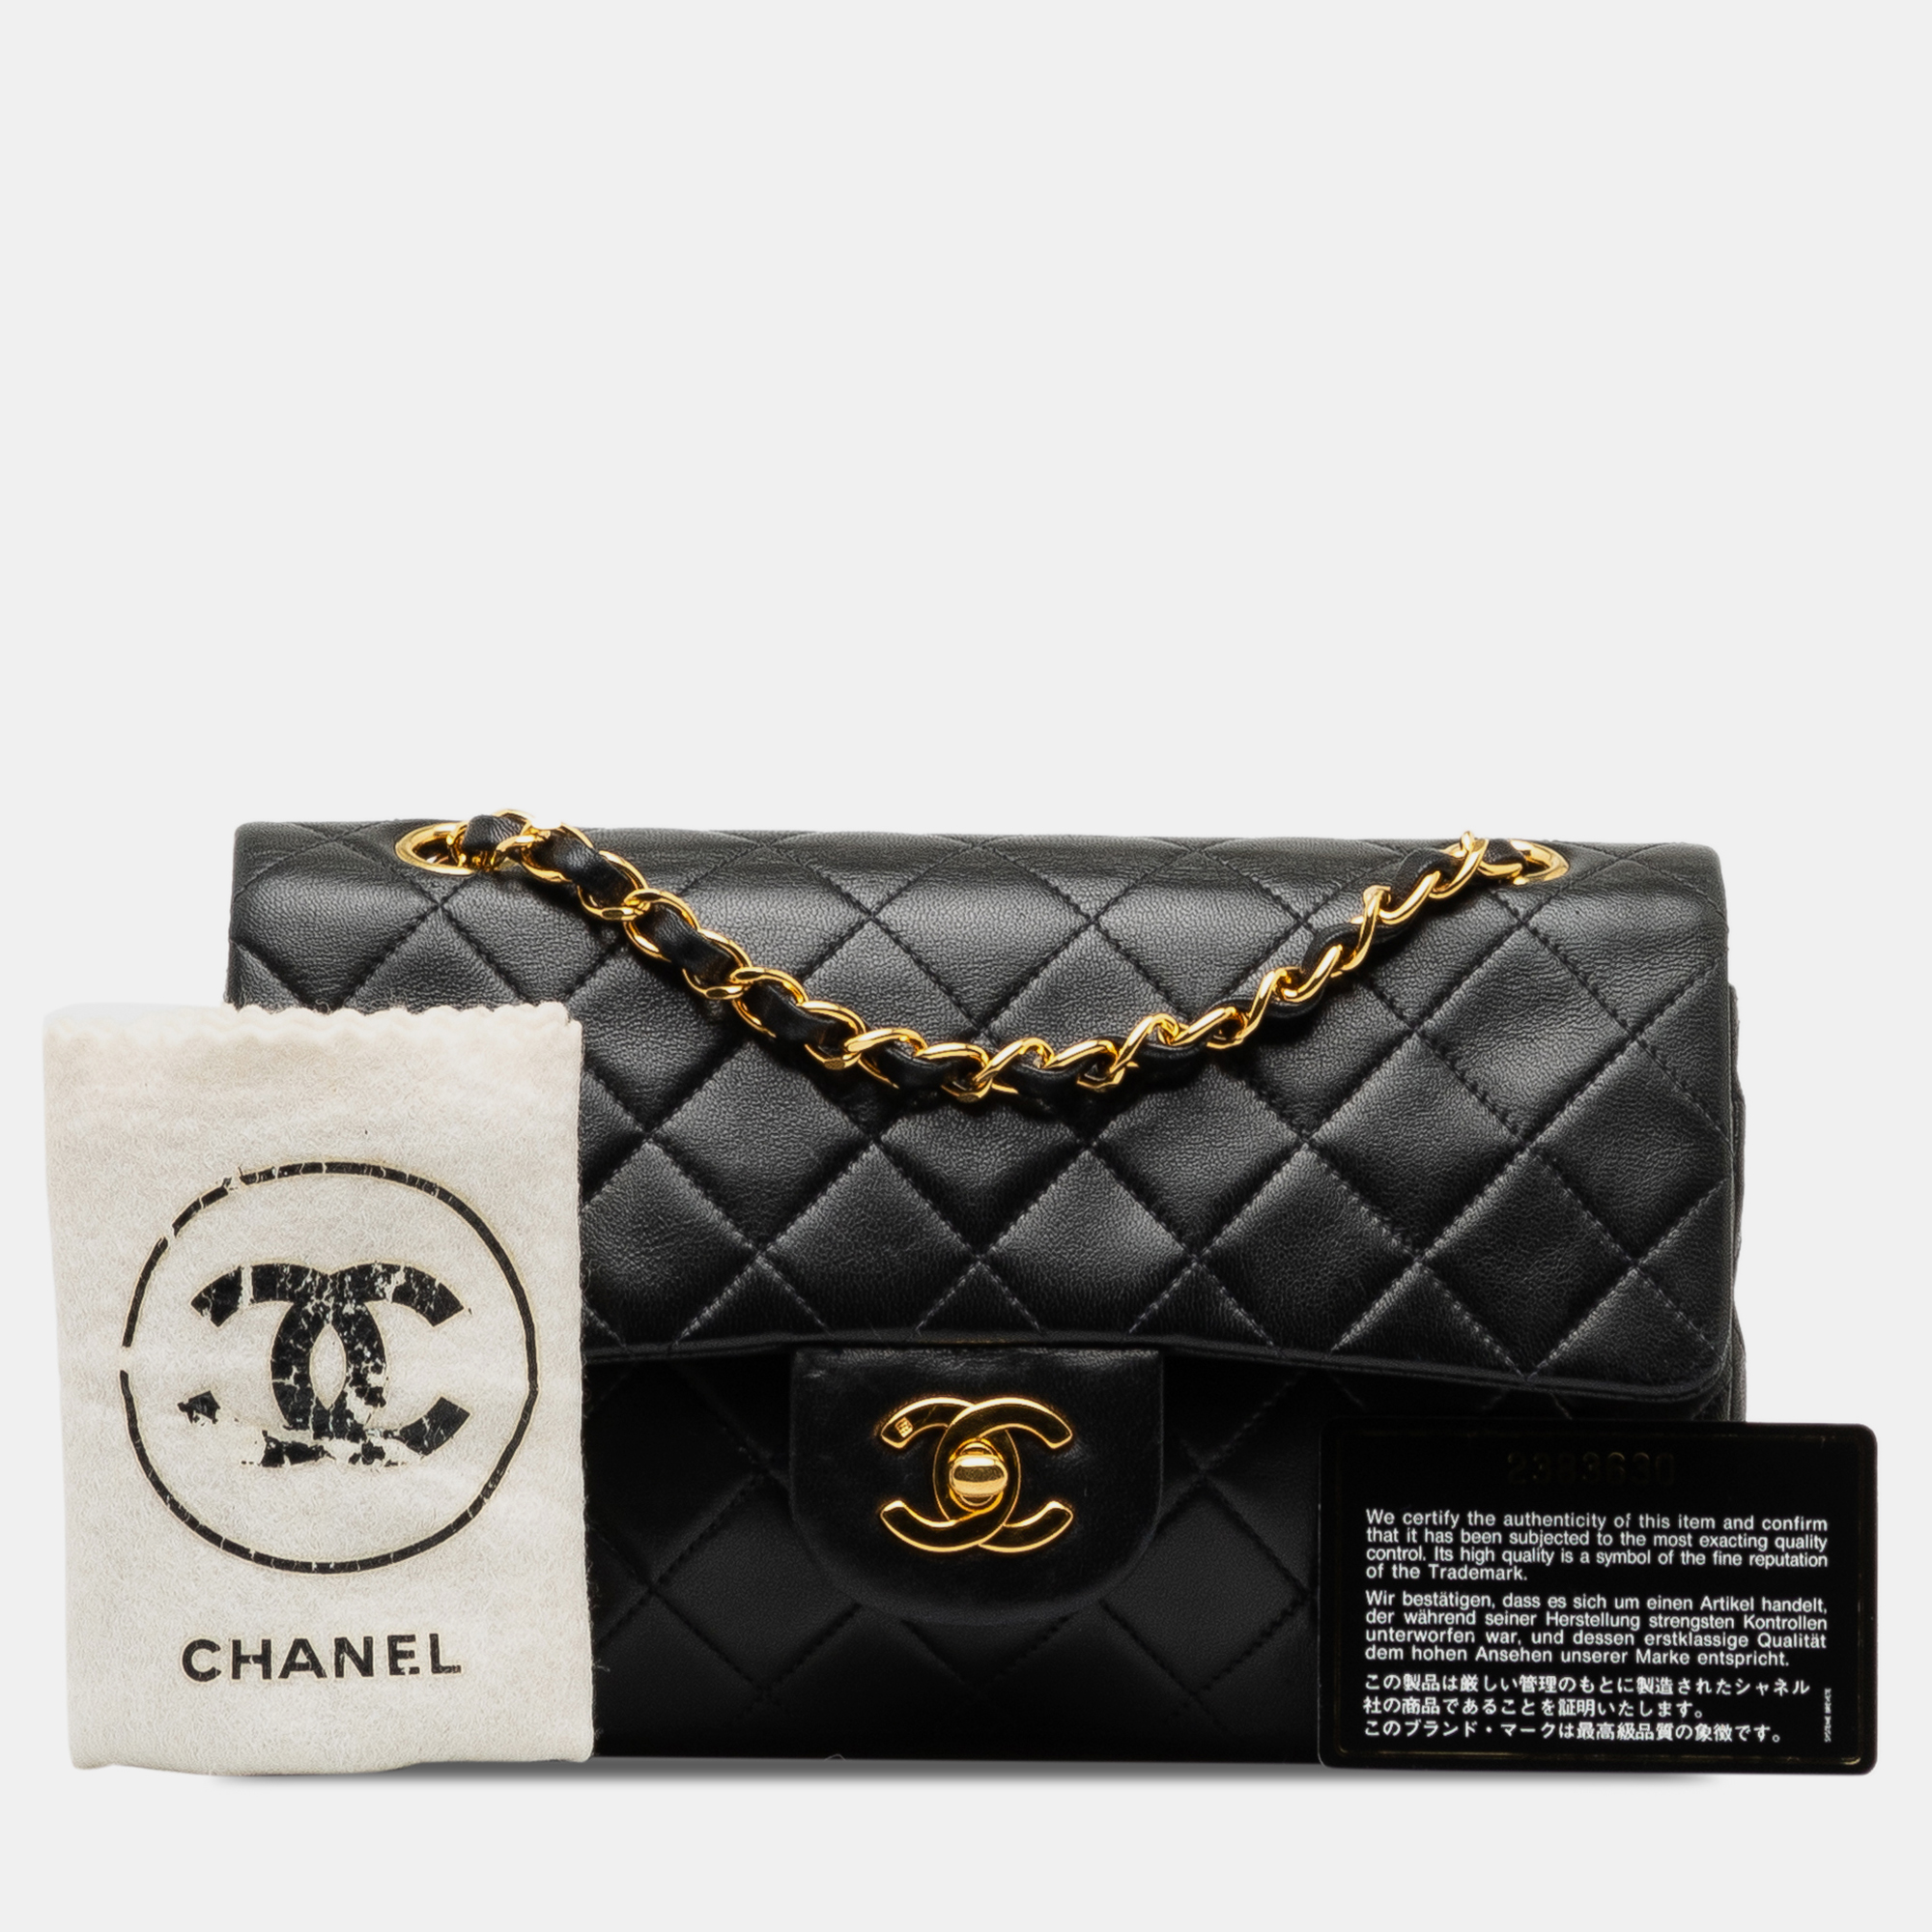 Chanel small classic lambskin double flap bag